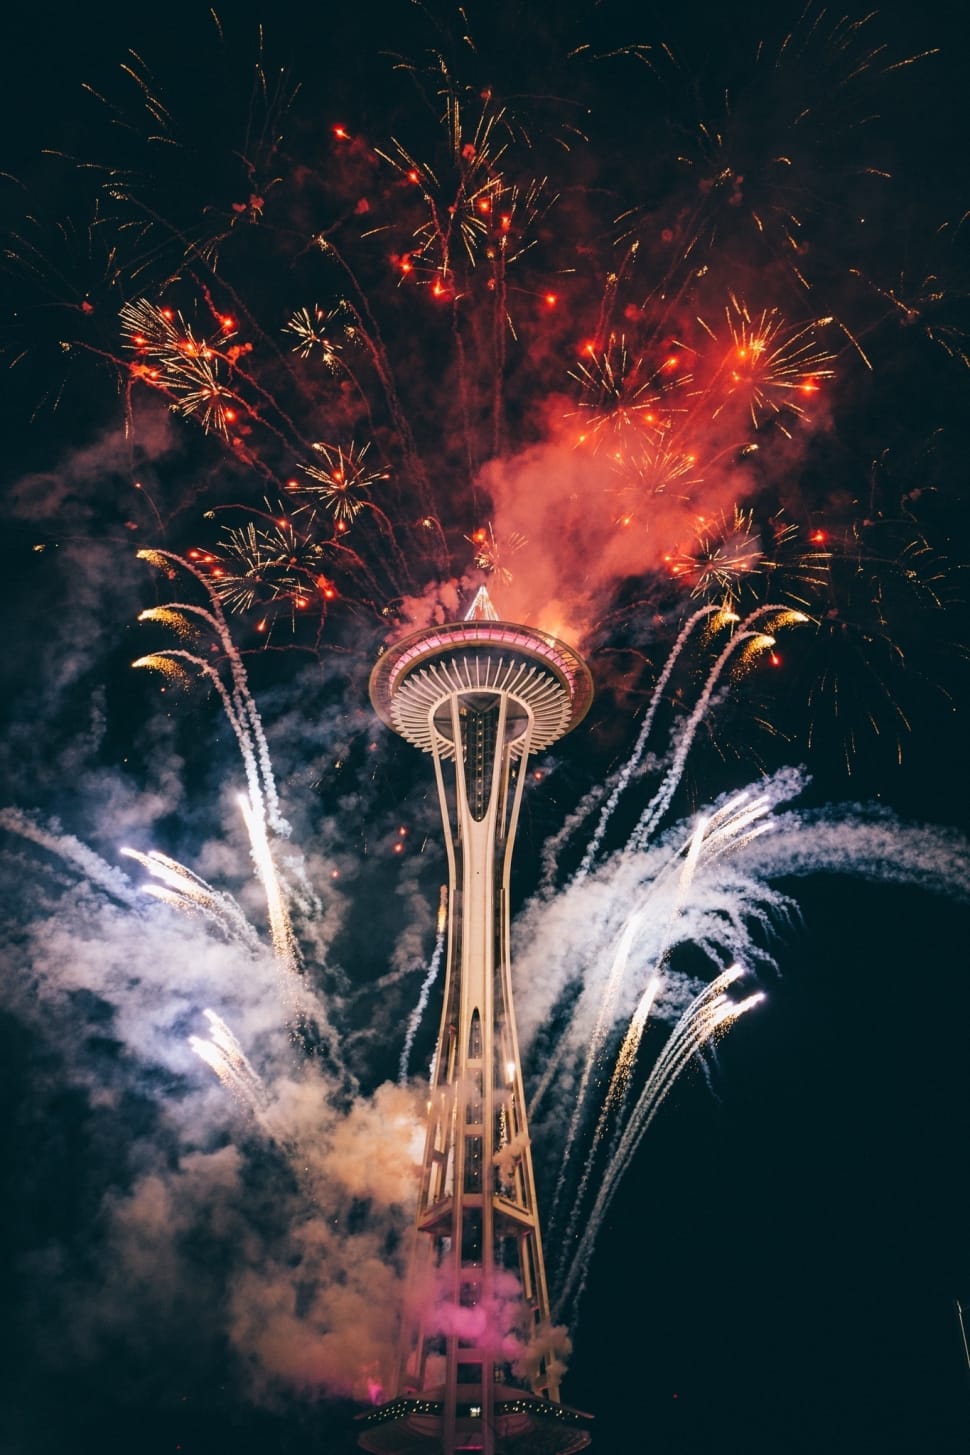 seatle space needle preview